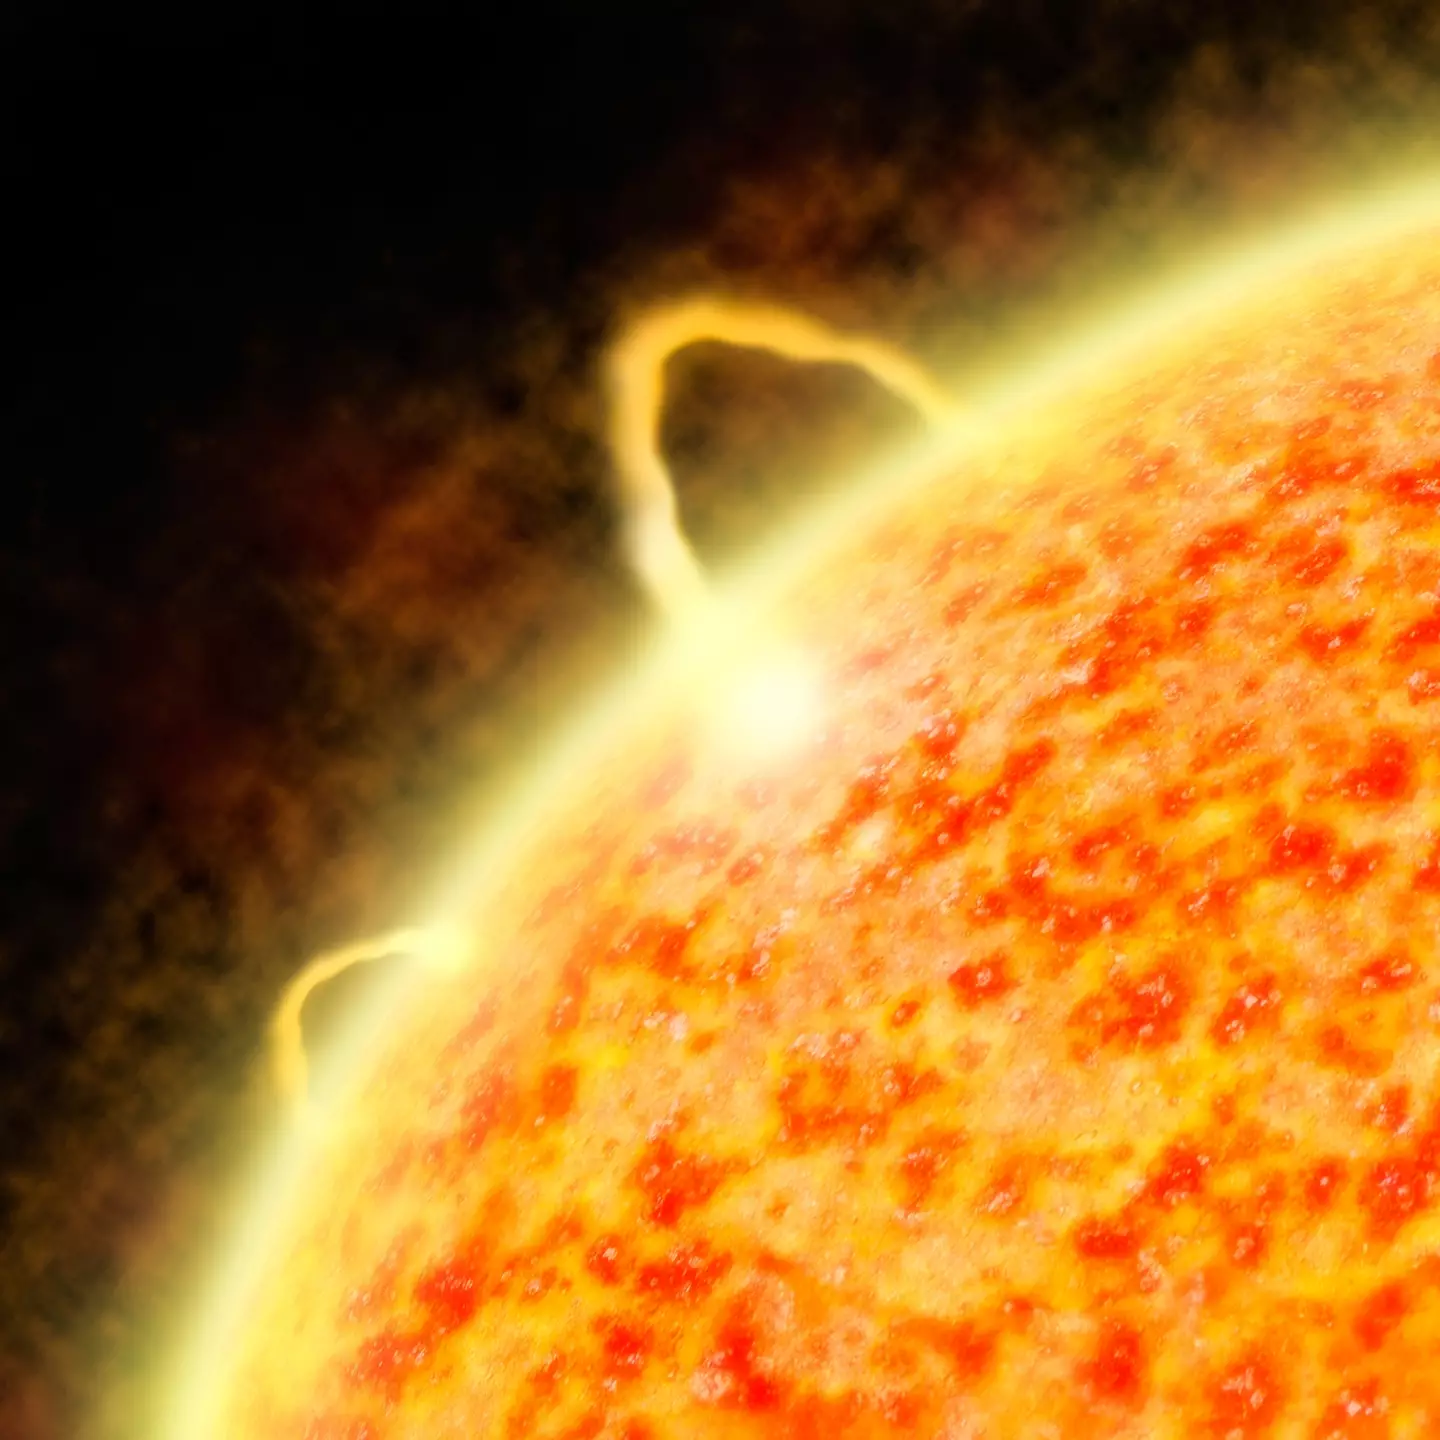 A solar flare might hit earth in the coming days.